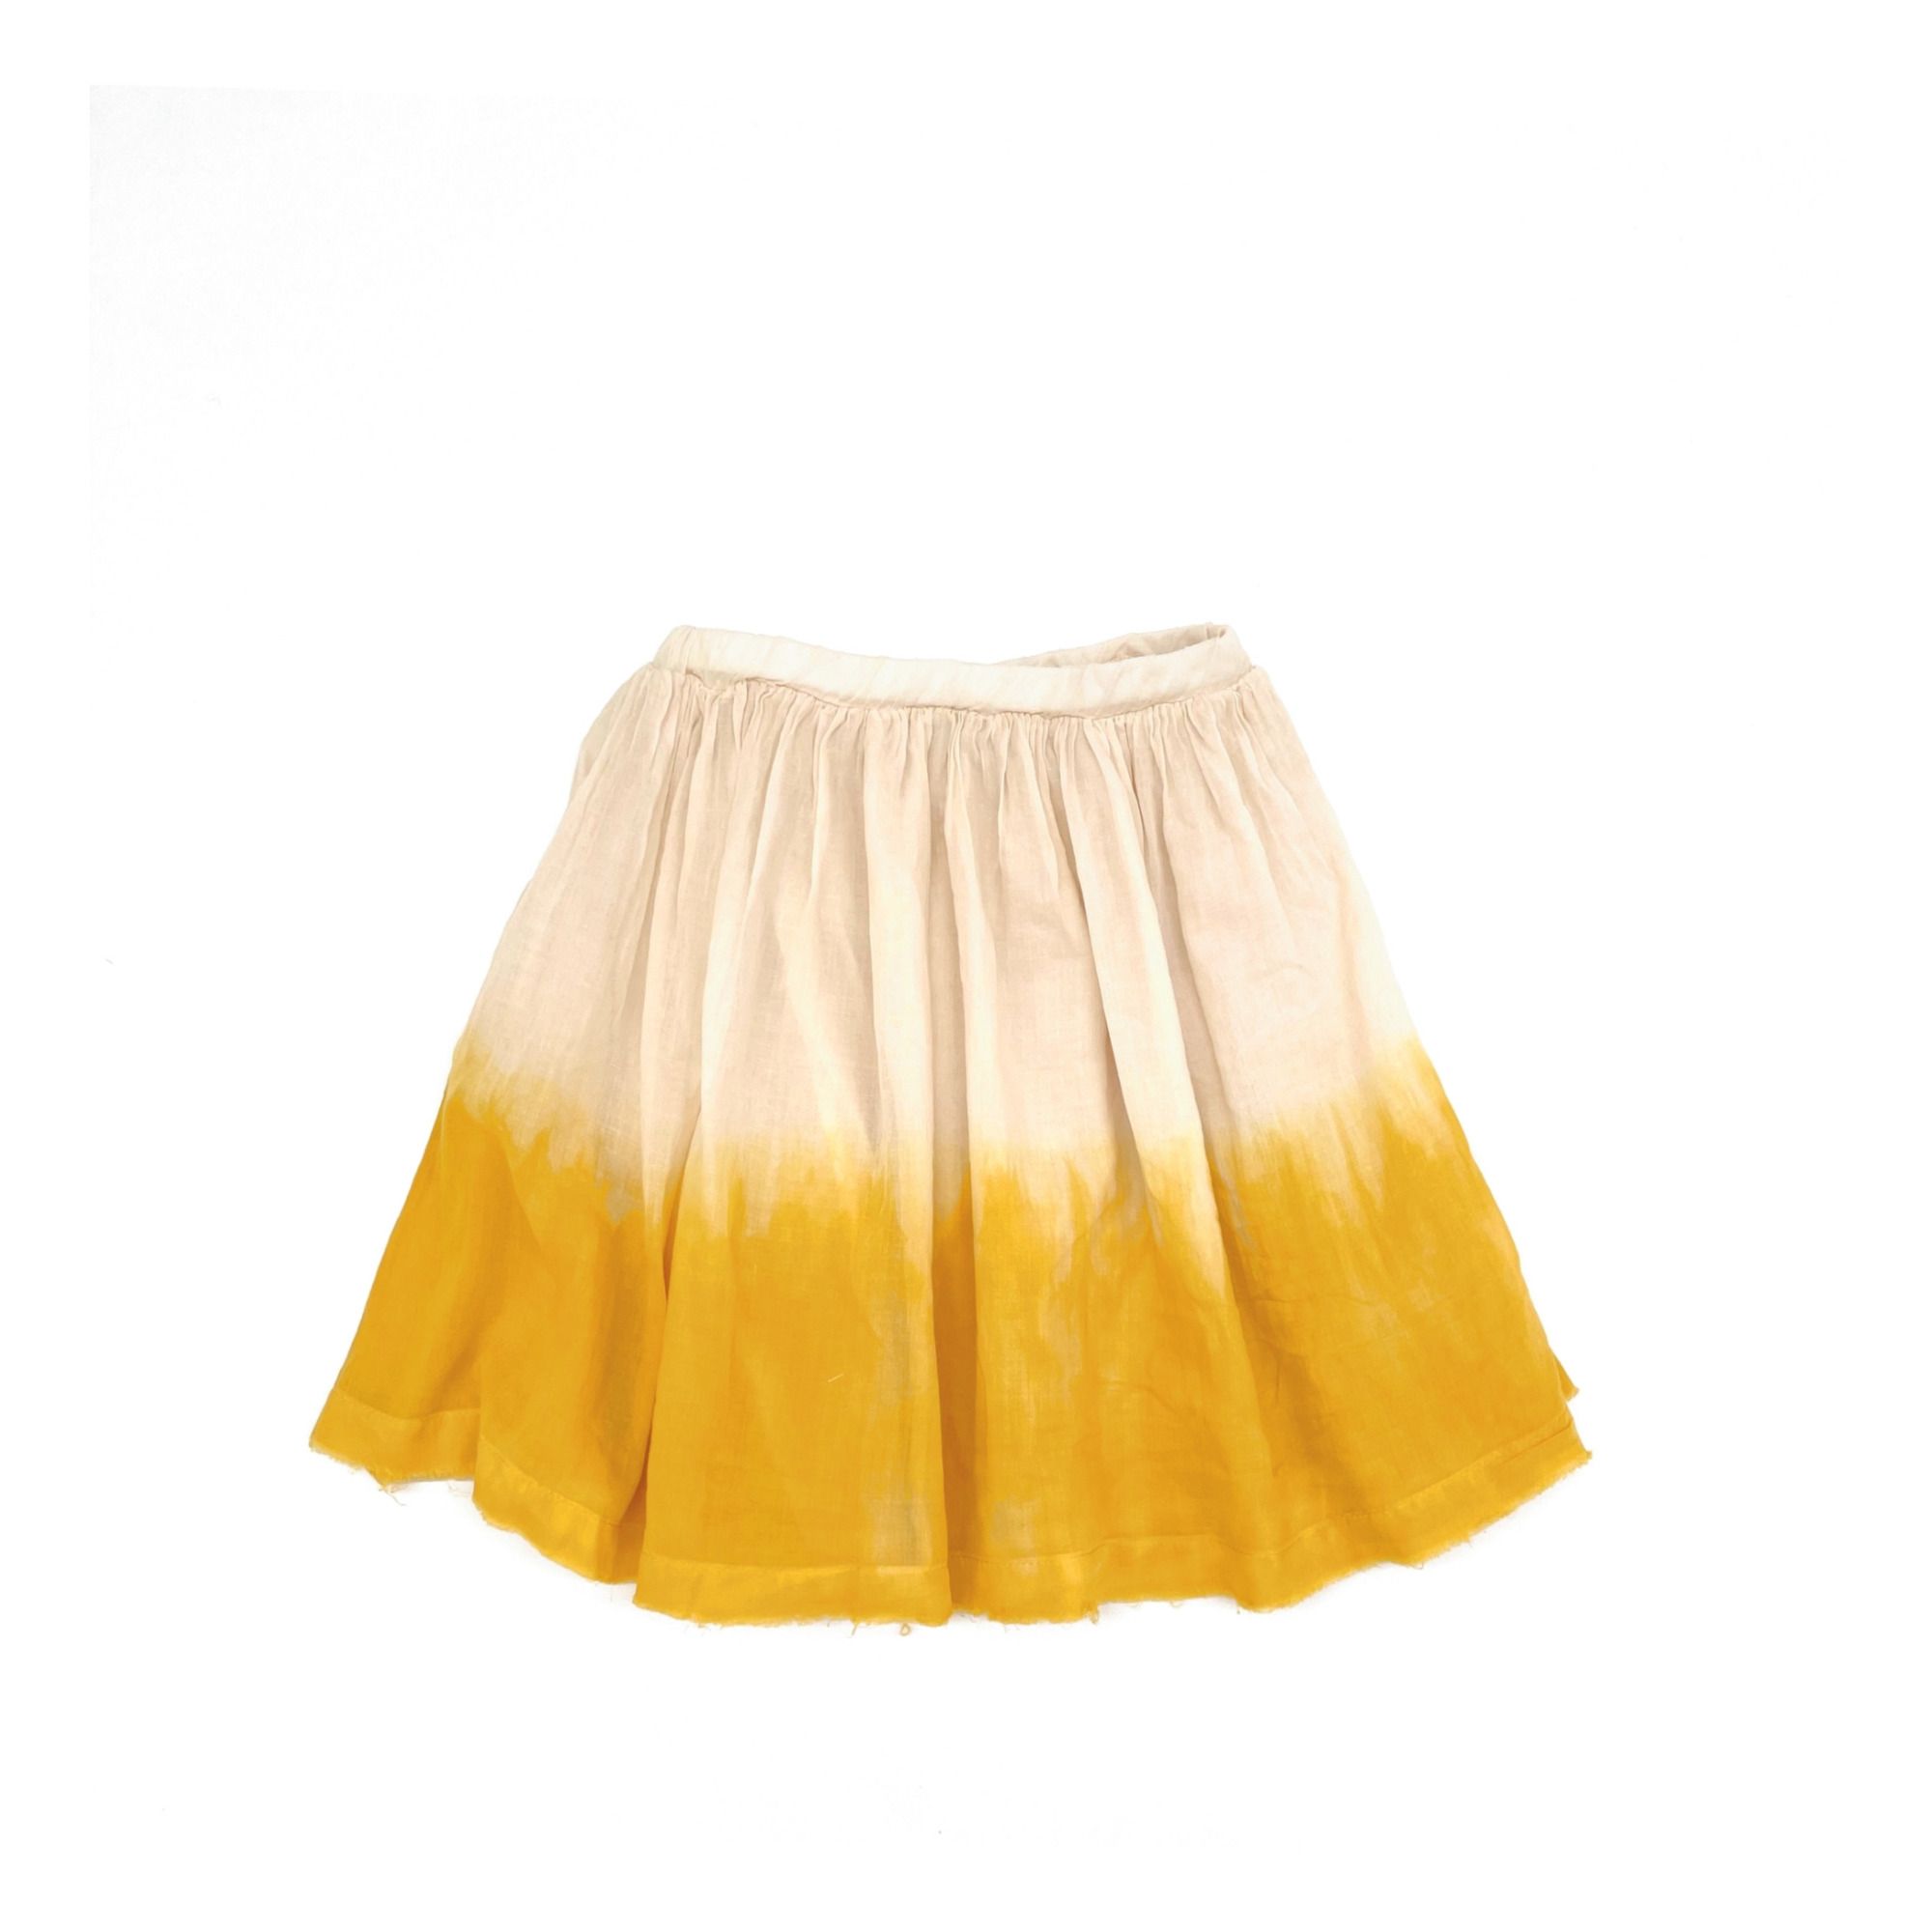 Longlivethequeen - Jupe Tie and Dye Coton Bio - Fille - Jaune